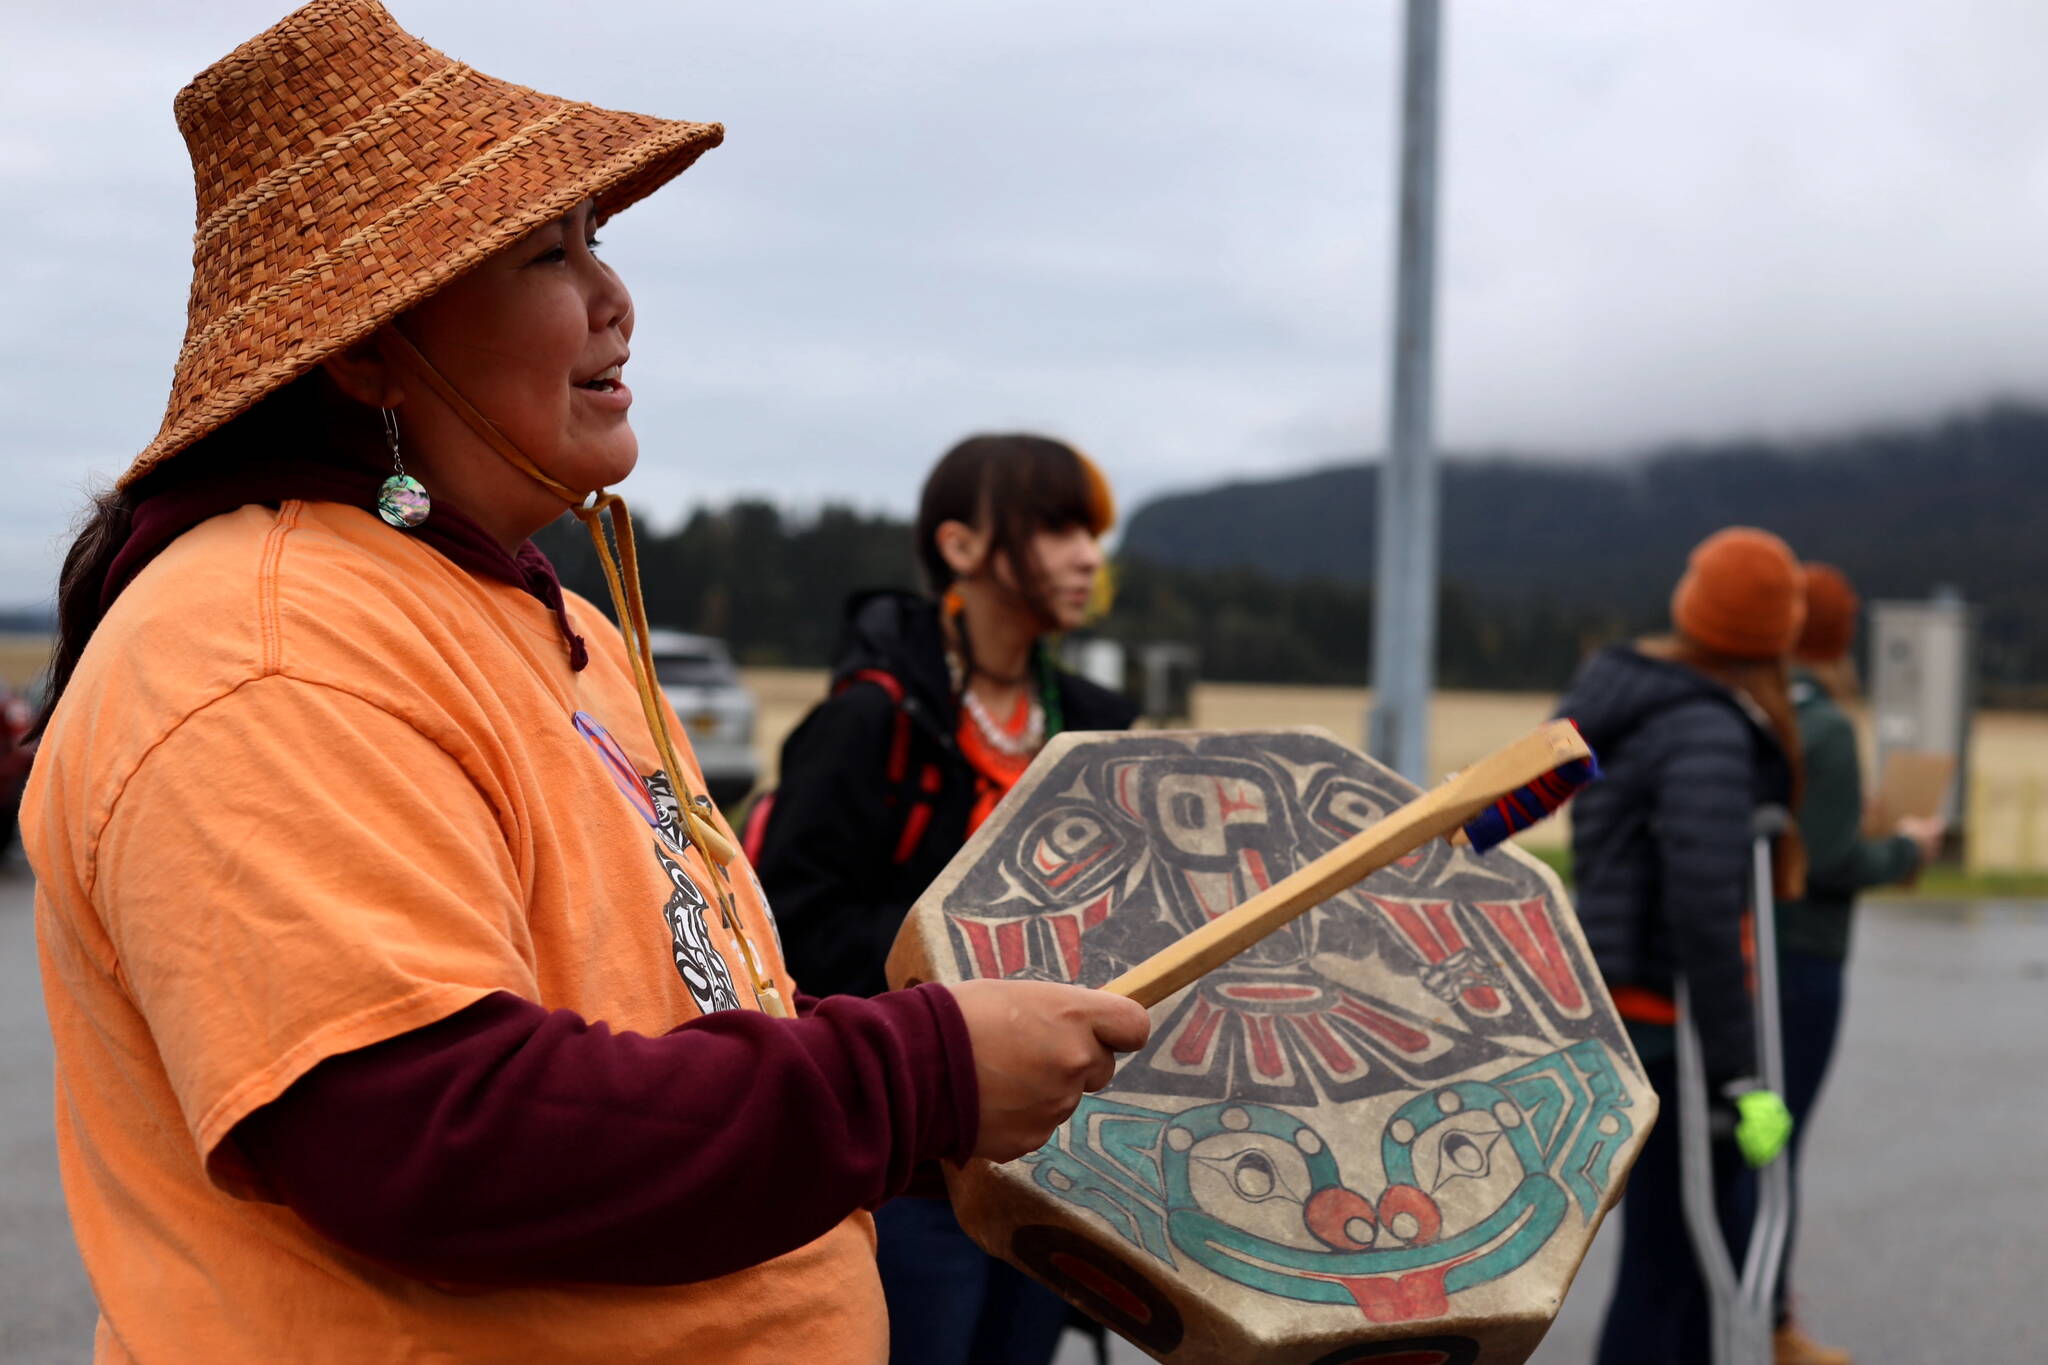 Natalie Brown plays a drum and sings during an Orange Shirt Day event near the Mendenhall Wetlands viewing area in Juneau on Saturday morning. (Clarise Larson / Juneau Empire)